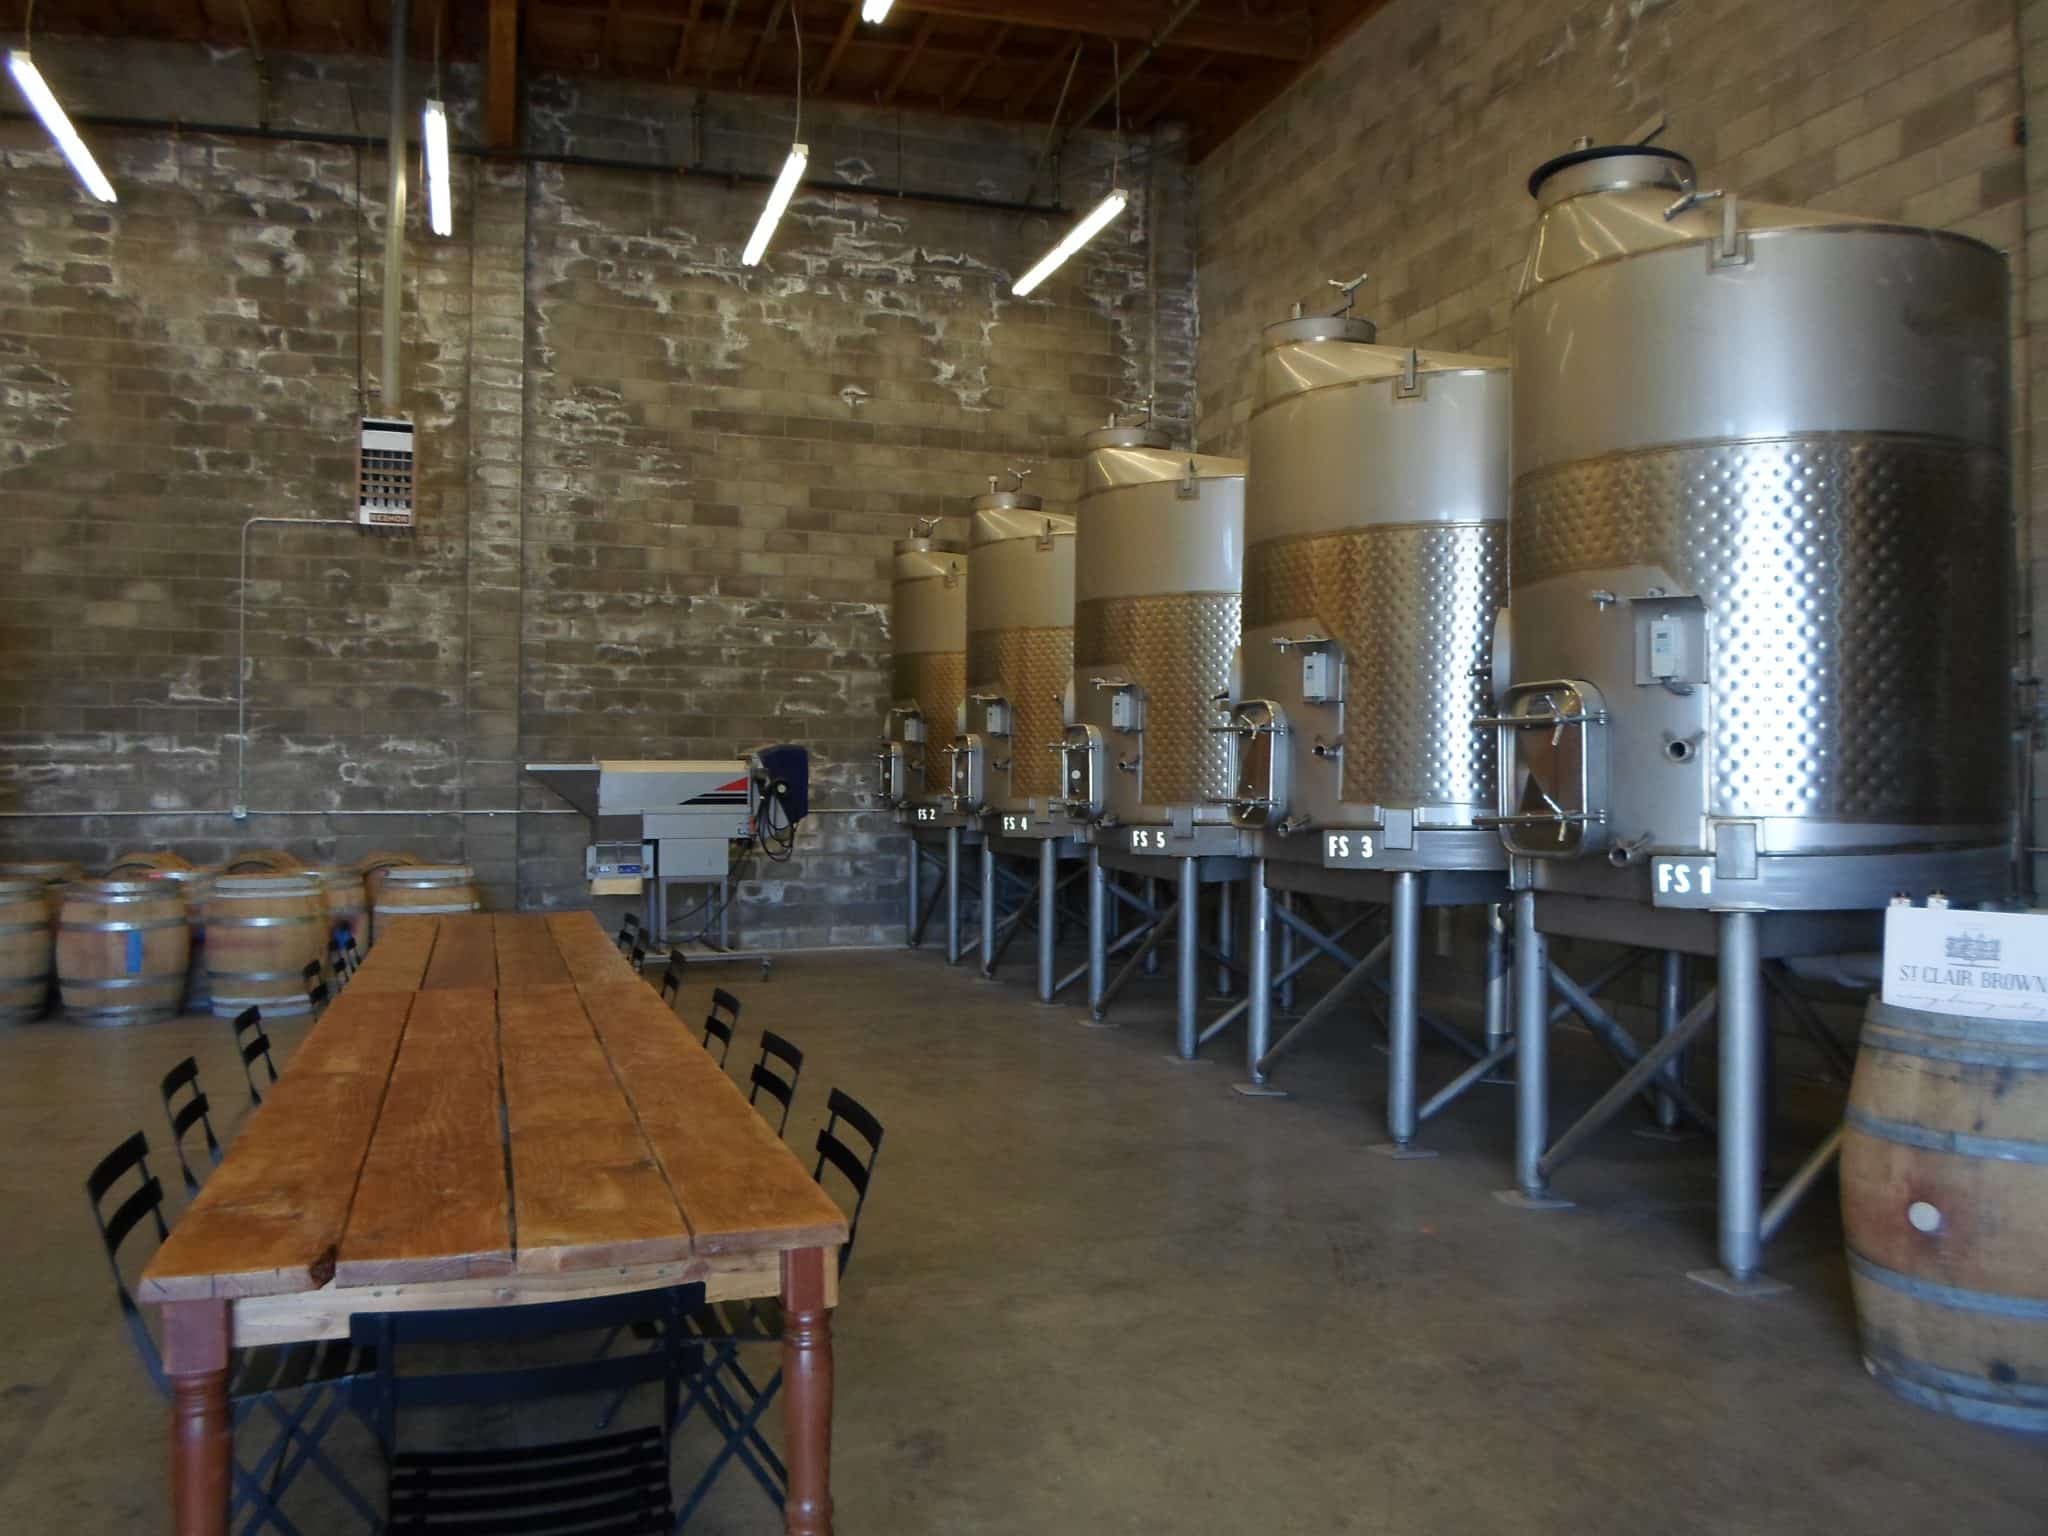 View of the winery's interior